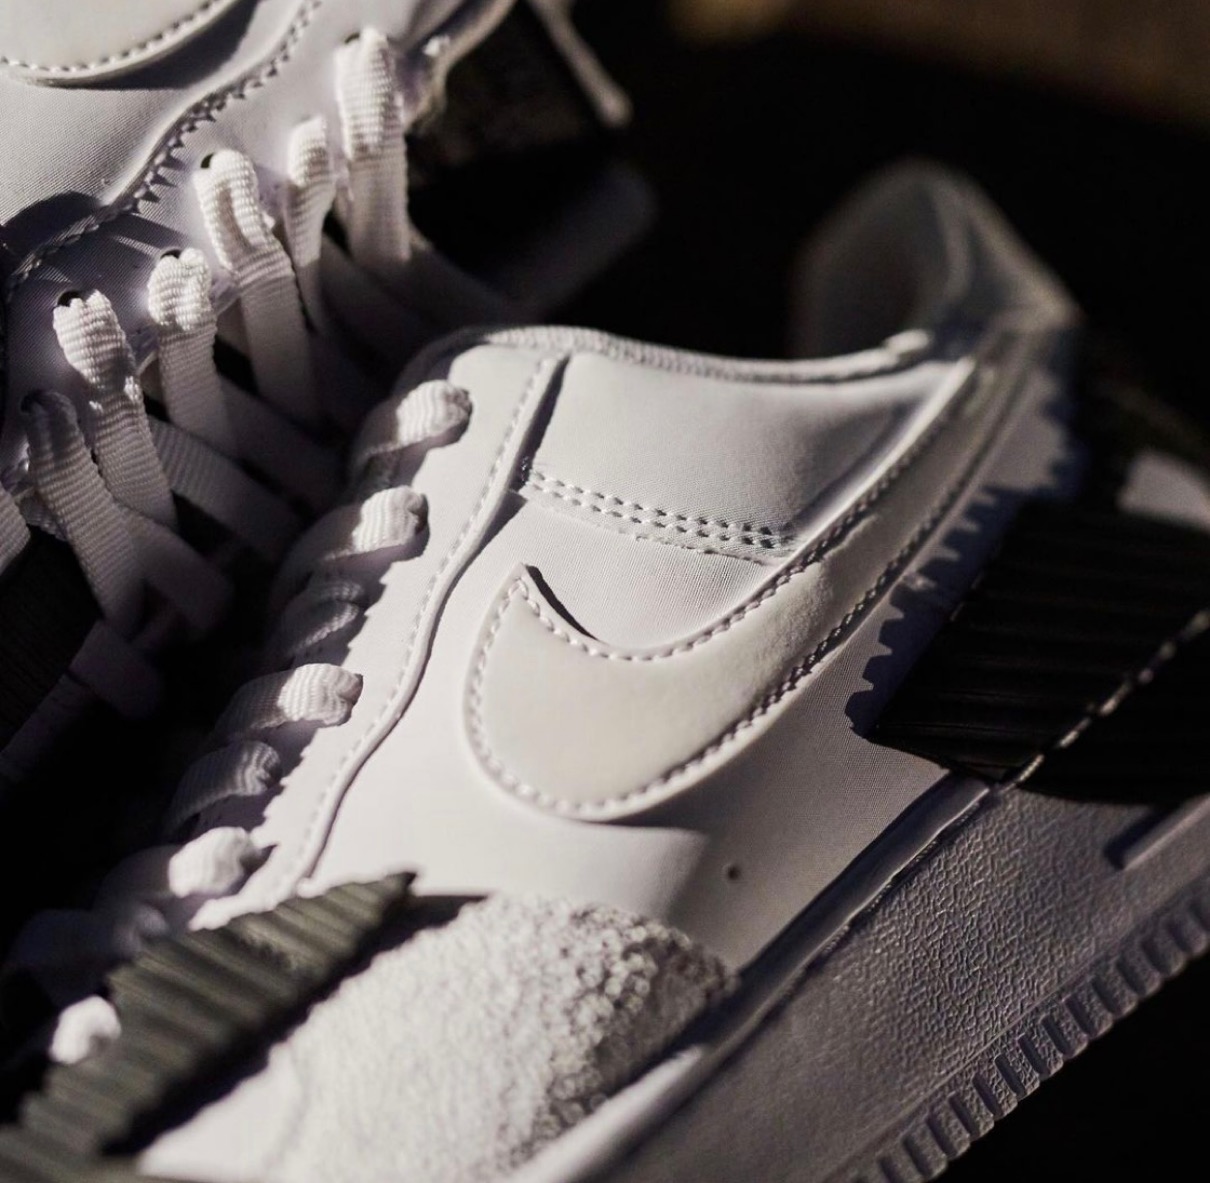 Nike】Air Force 1 NDSTRKT “White”が国内12月1日に発売予定 | UP TO DATE